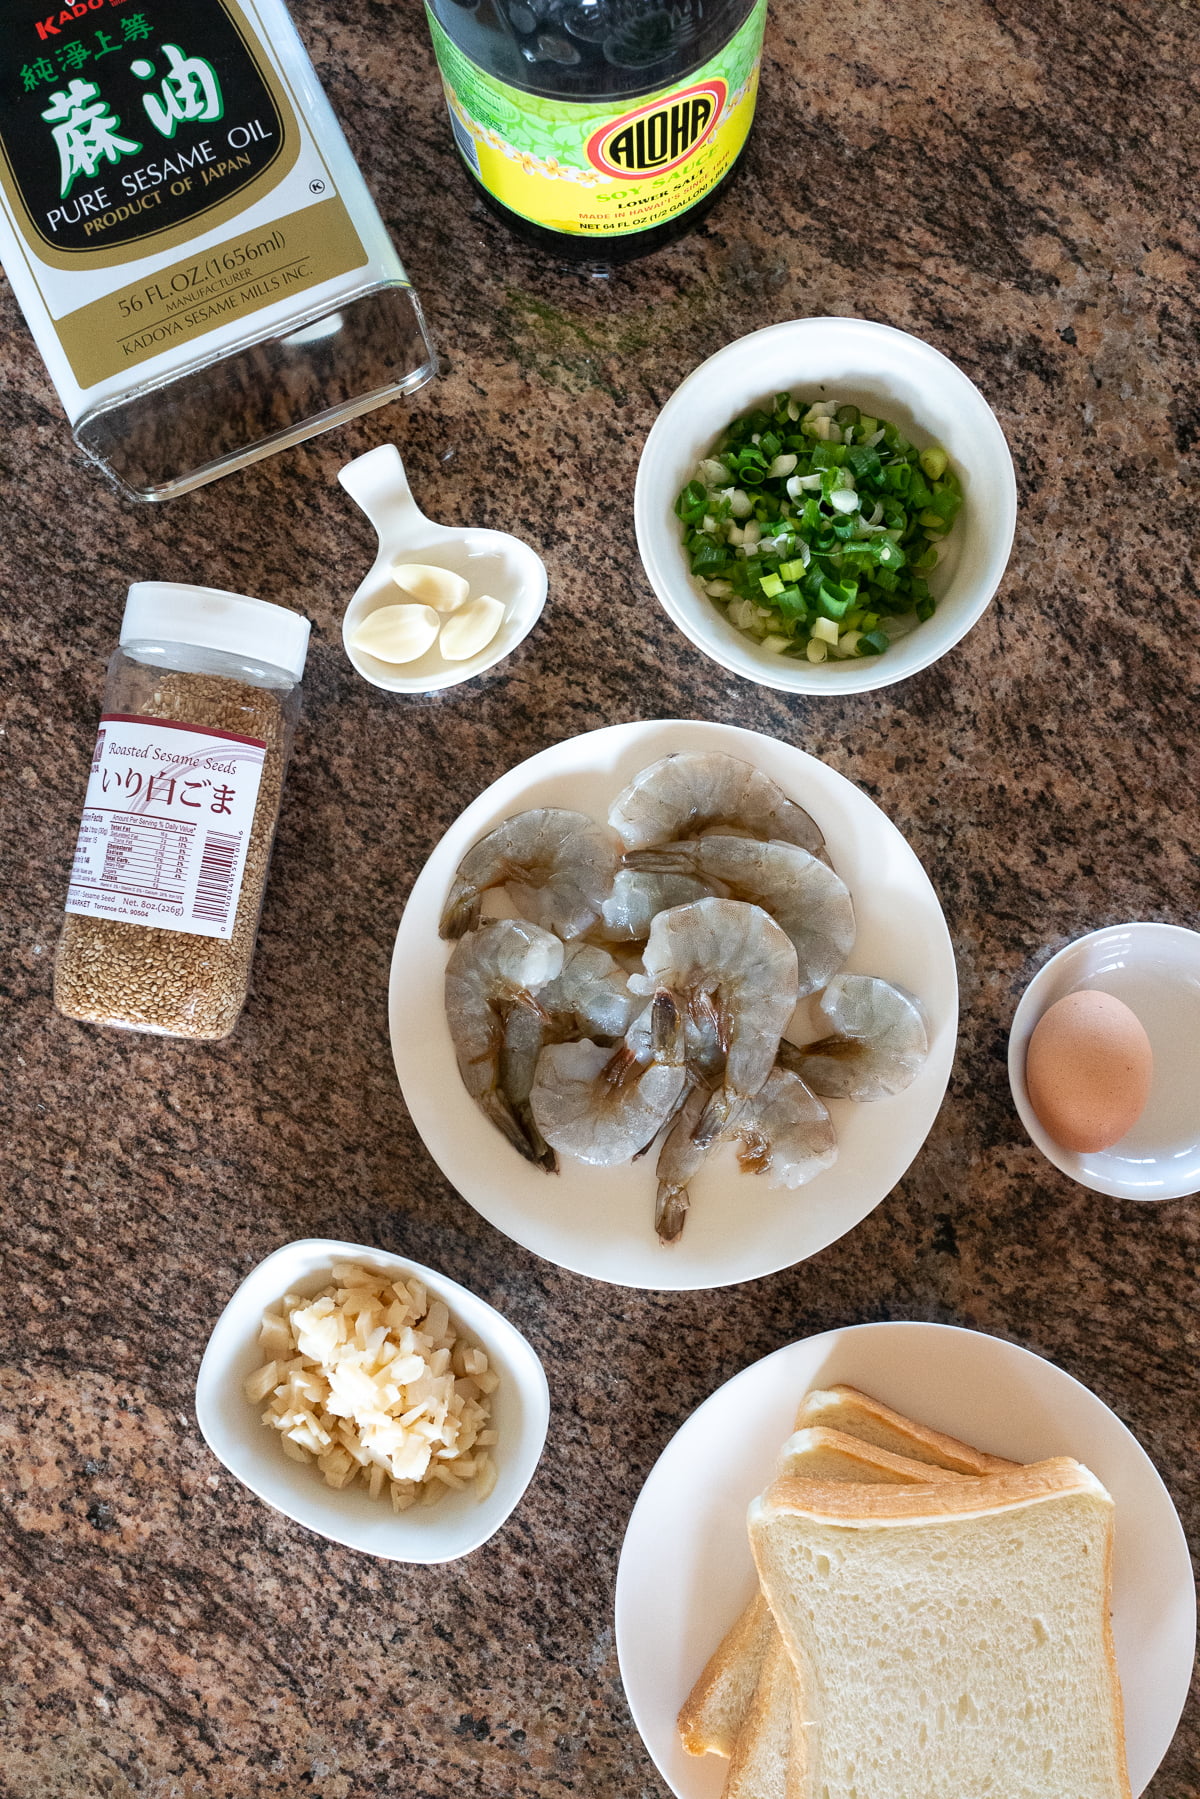 Ingredients for Shrimp Toast: shrimp, egg, water chestnuts, garlic, green onions, soy sauce, sesame oil, sesame seeds, and white bread.